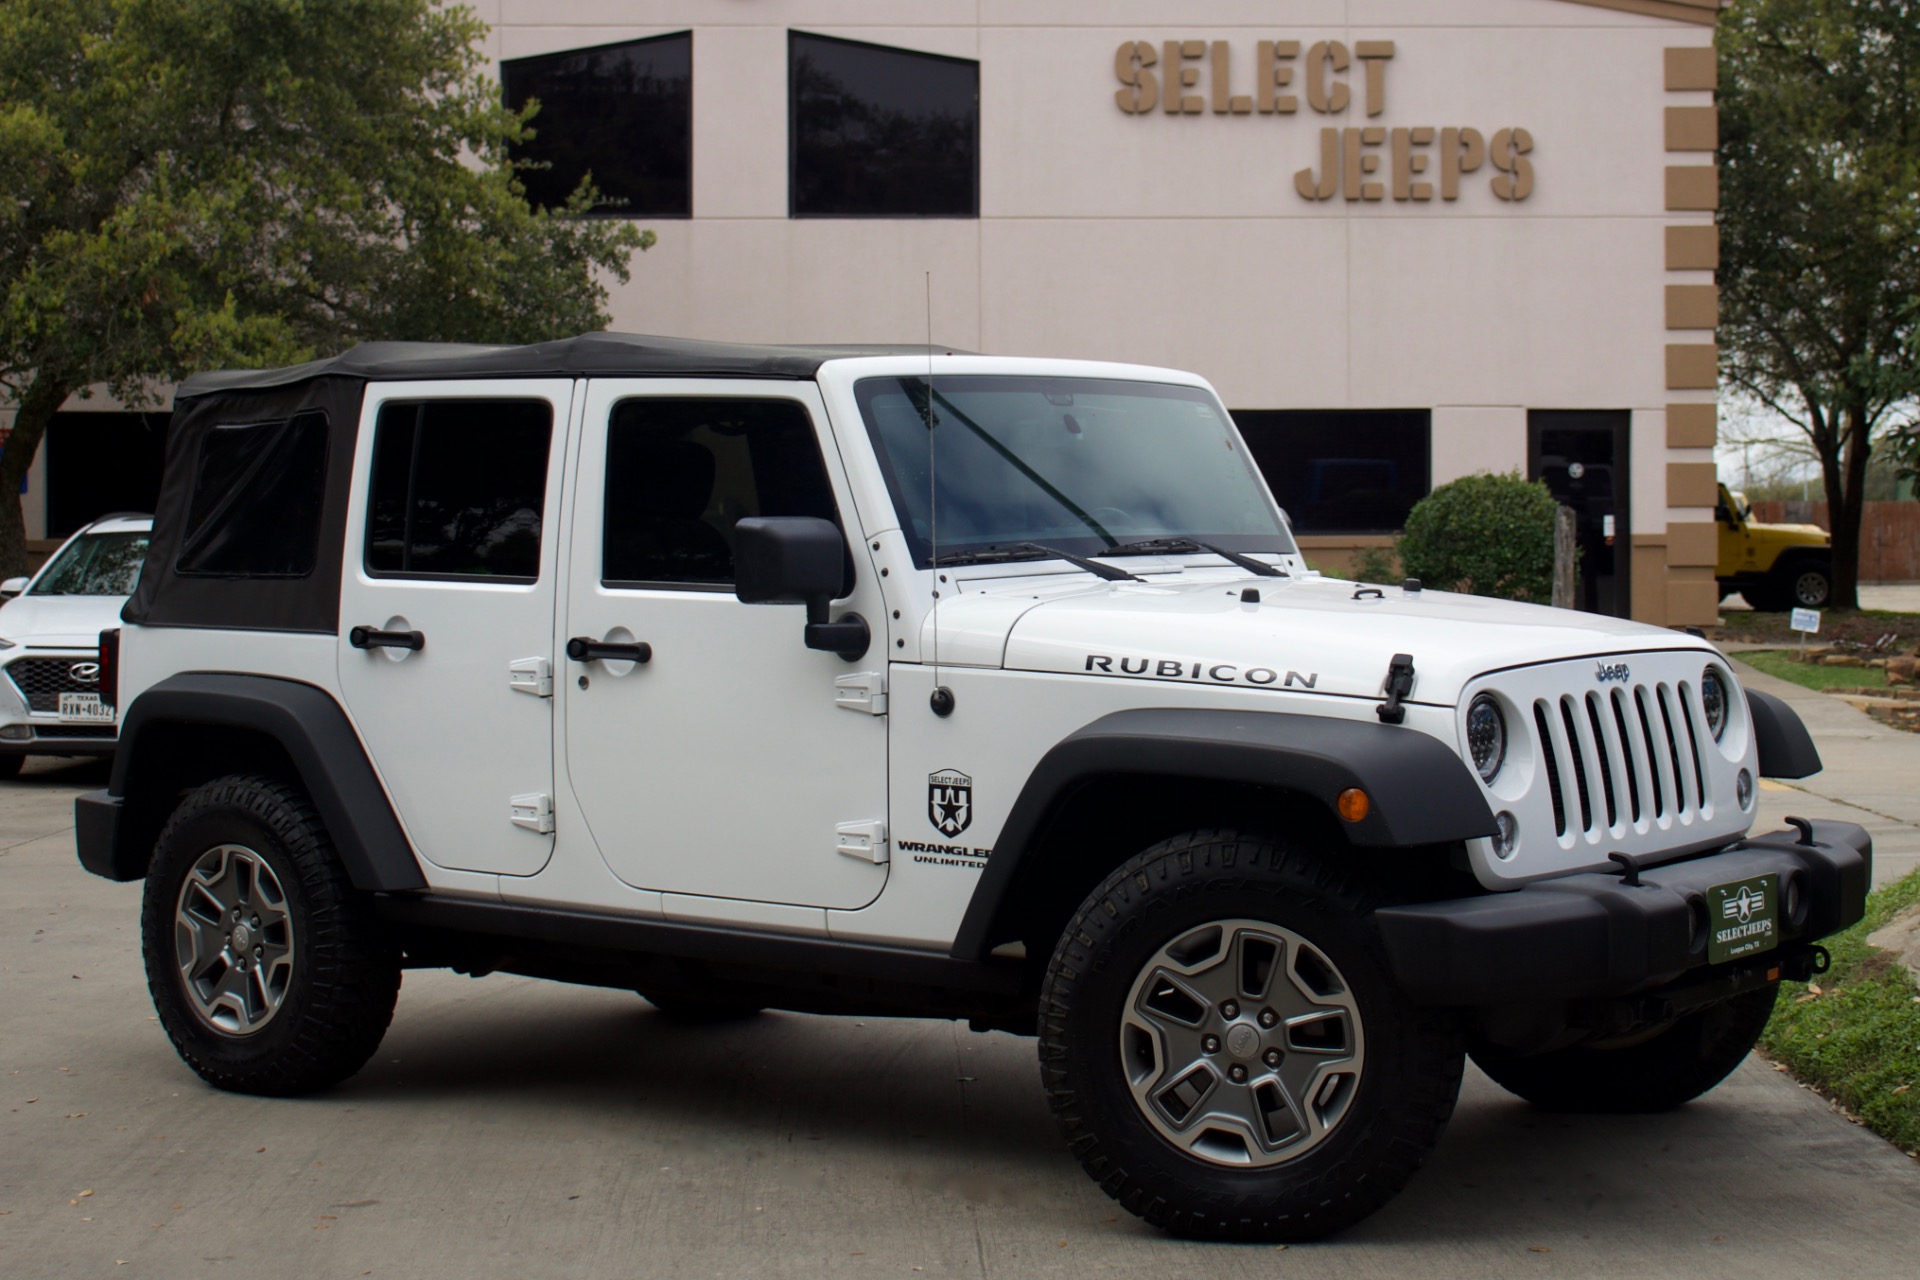 Used 2014 Jeep Wrangler Unlimited Rubicon For Sale ($28,995) | Select Jeeps  Inc. Stock #142250